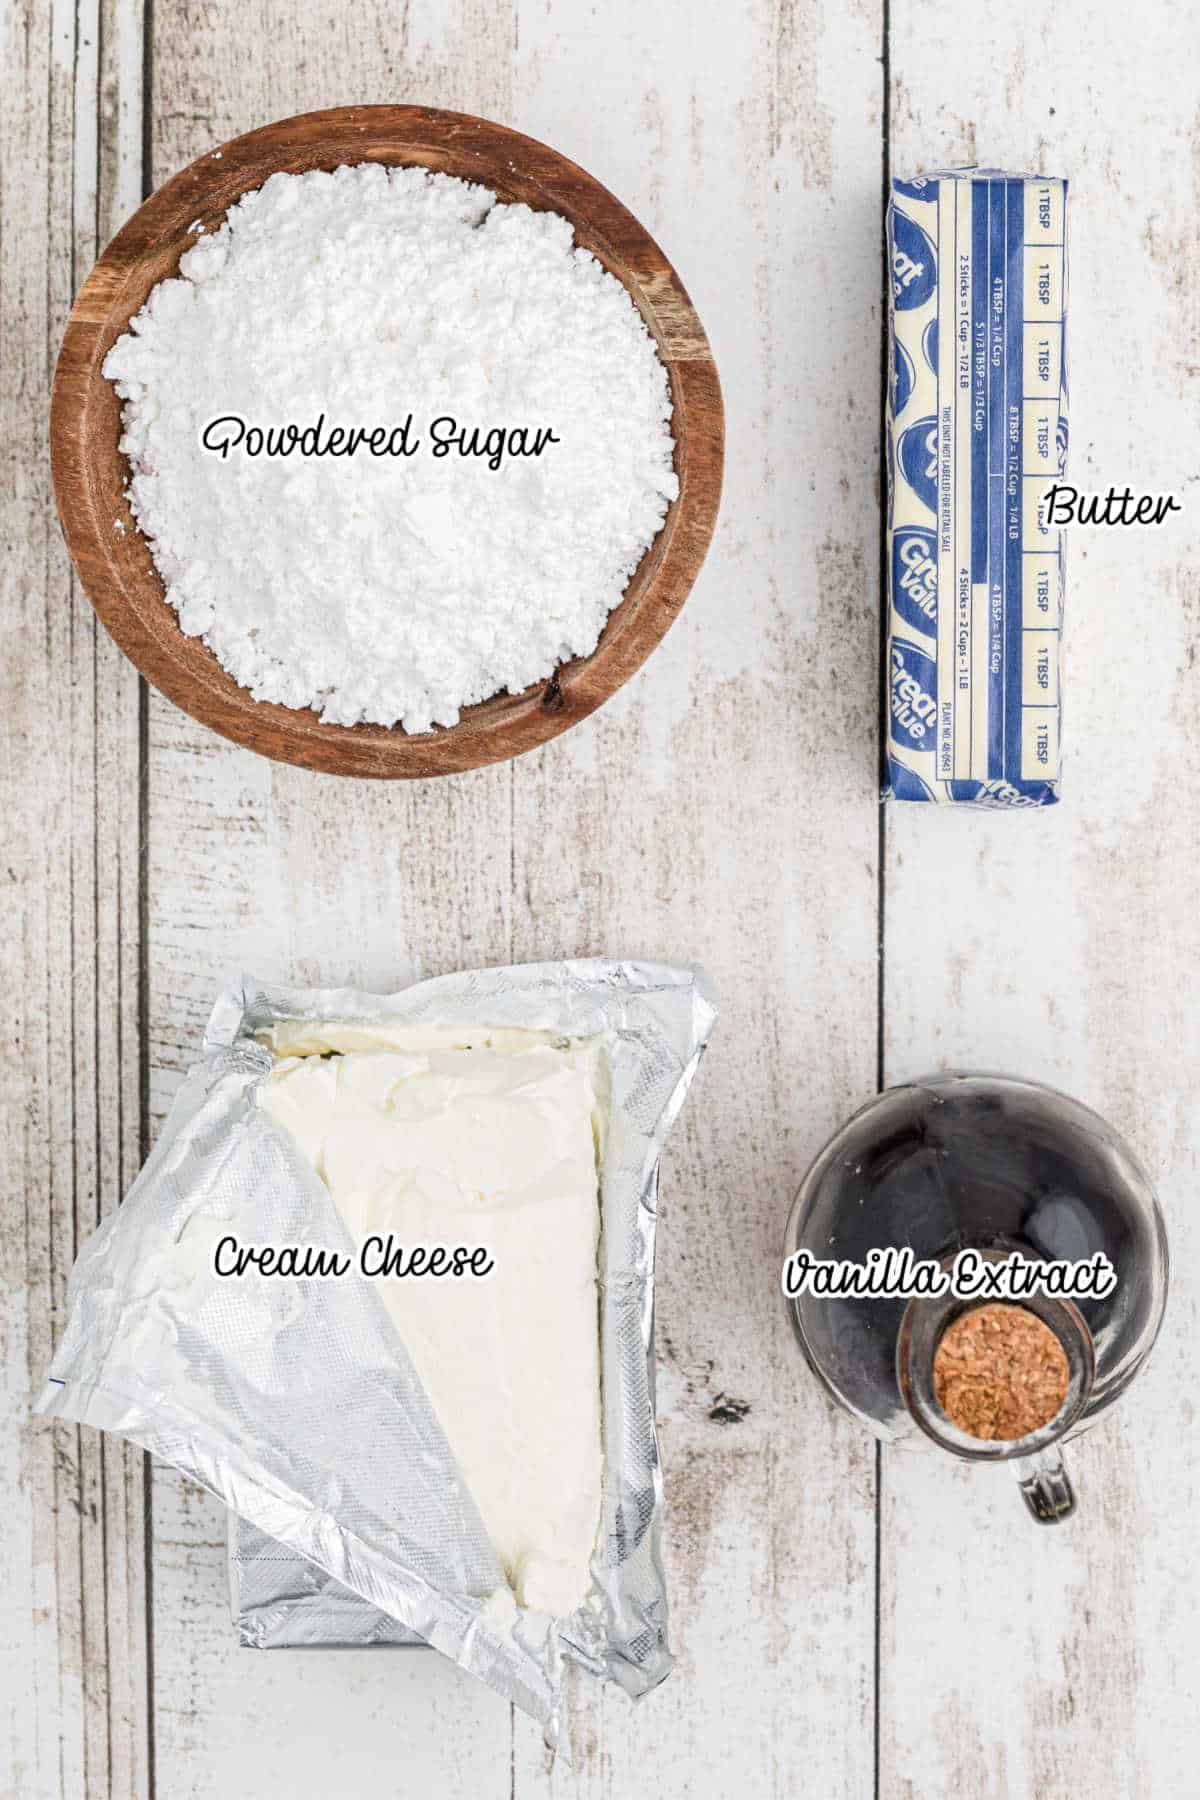 Overhead view of ingredients needed to make cream cheese frosting.